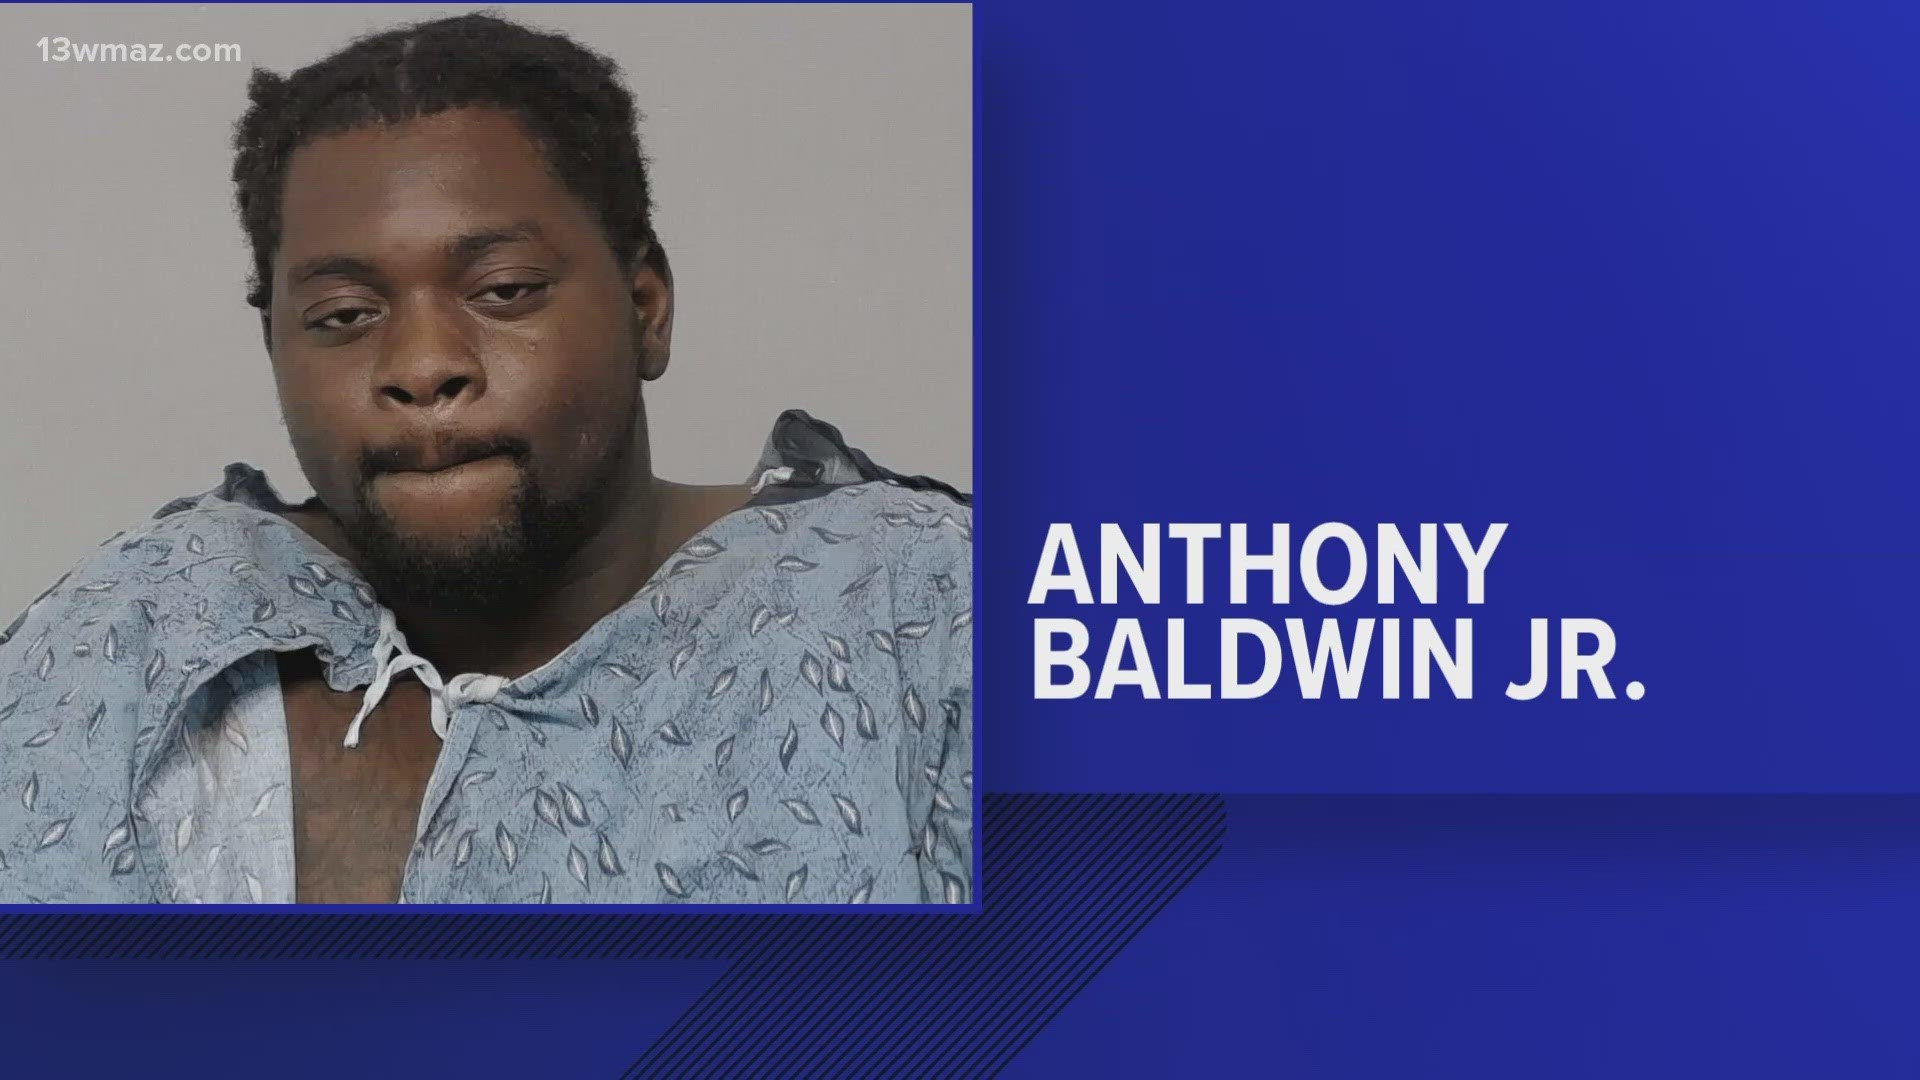 30-year-old Anthony Baldwin Jr. is charged with murder, aggravated assault, and probation violation